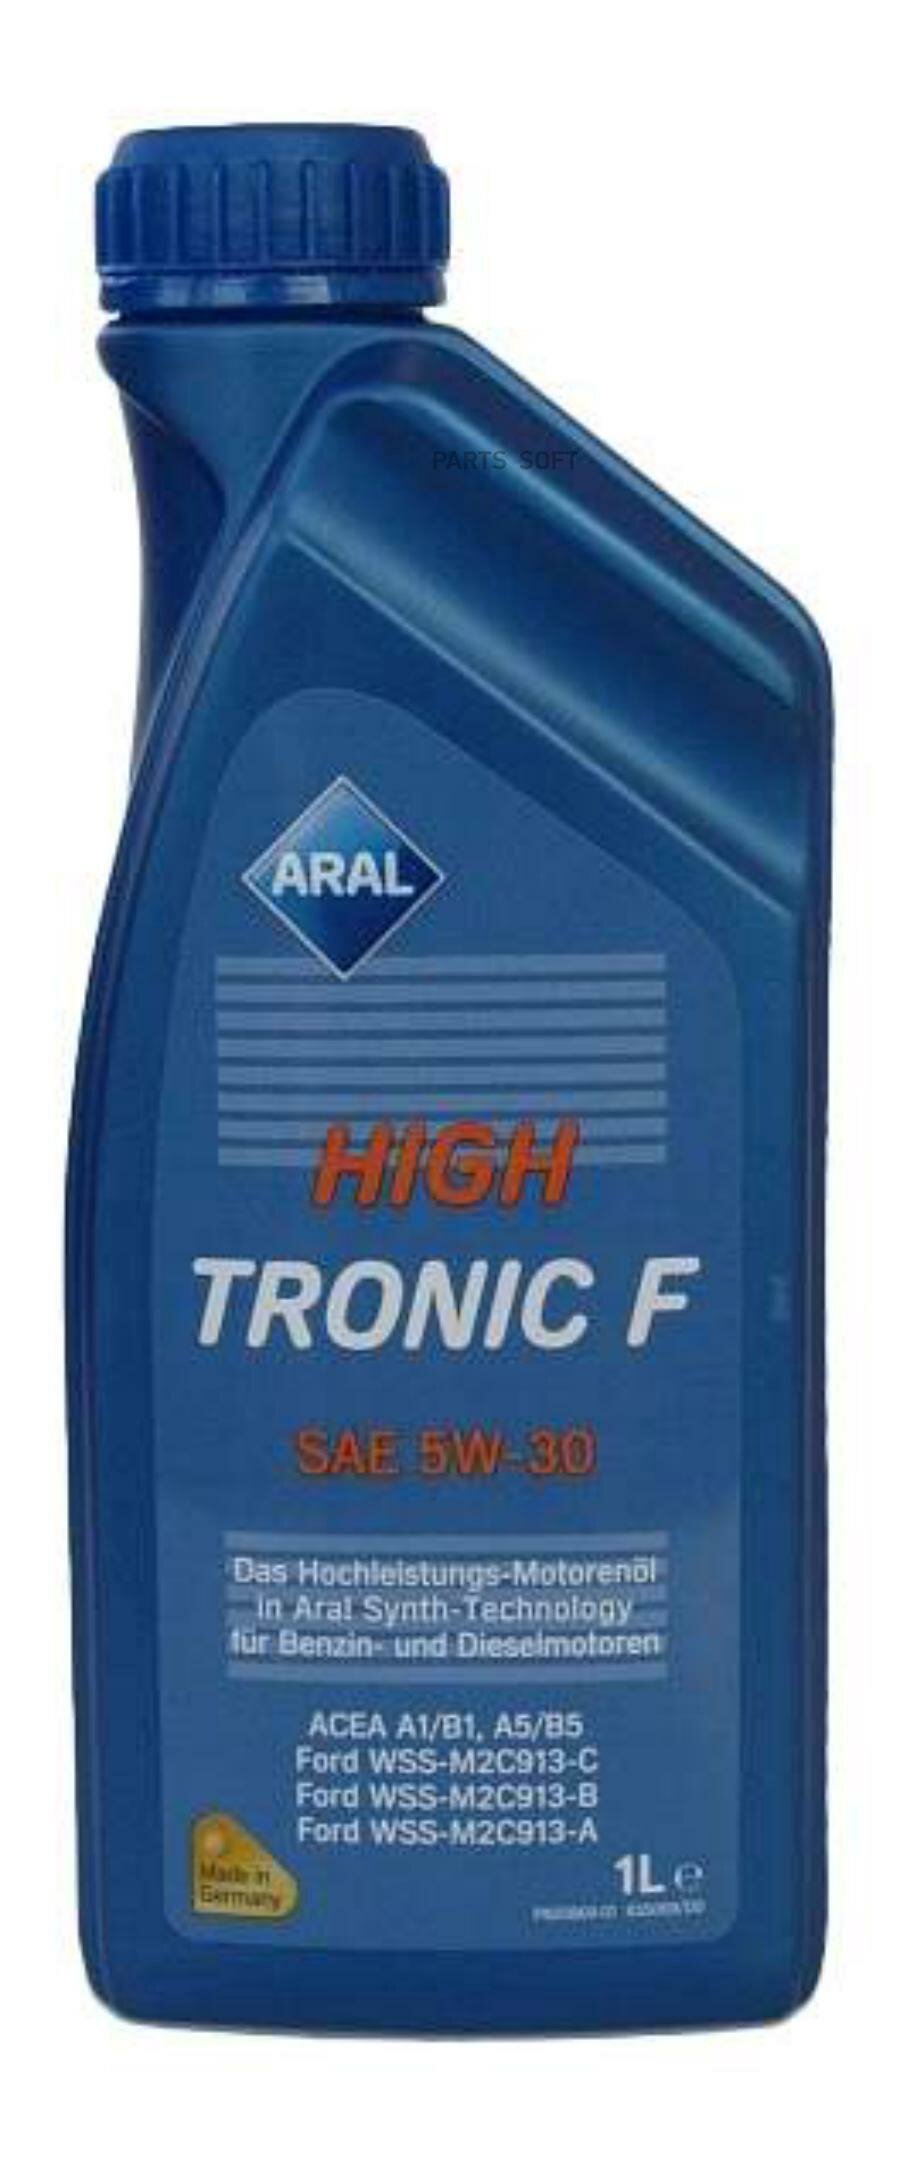 ARAL 1552A0 Aral масо High Tronic F 5W-30 (synt) 1.